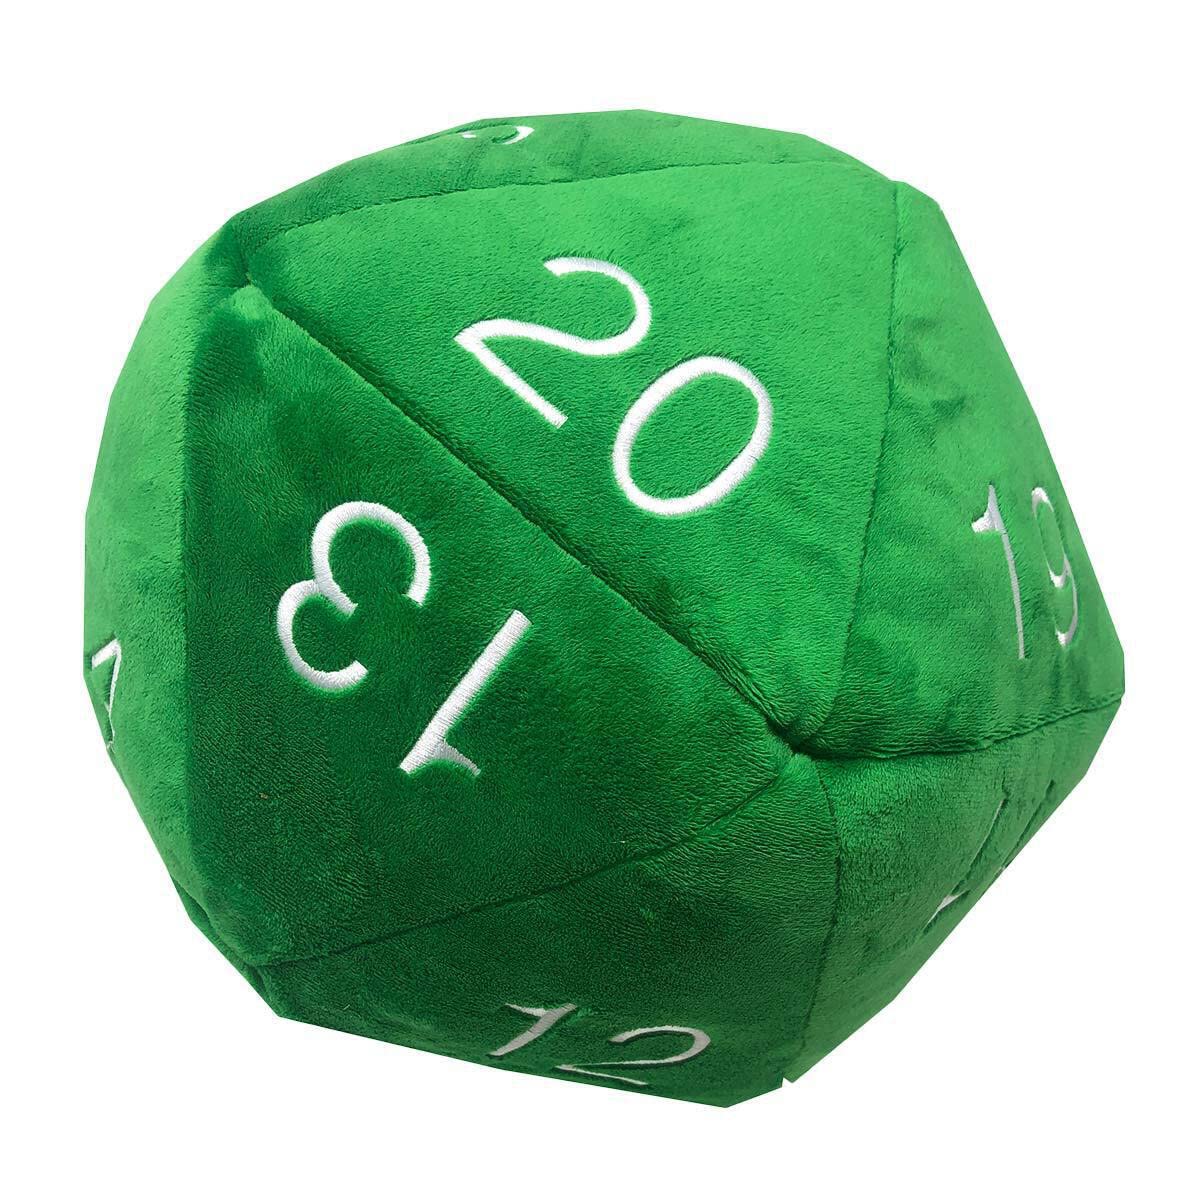 Ultra Pro International Jumbo D20 Novelty Dice Plush - Green with White - Lost City Toys